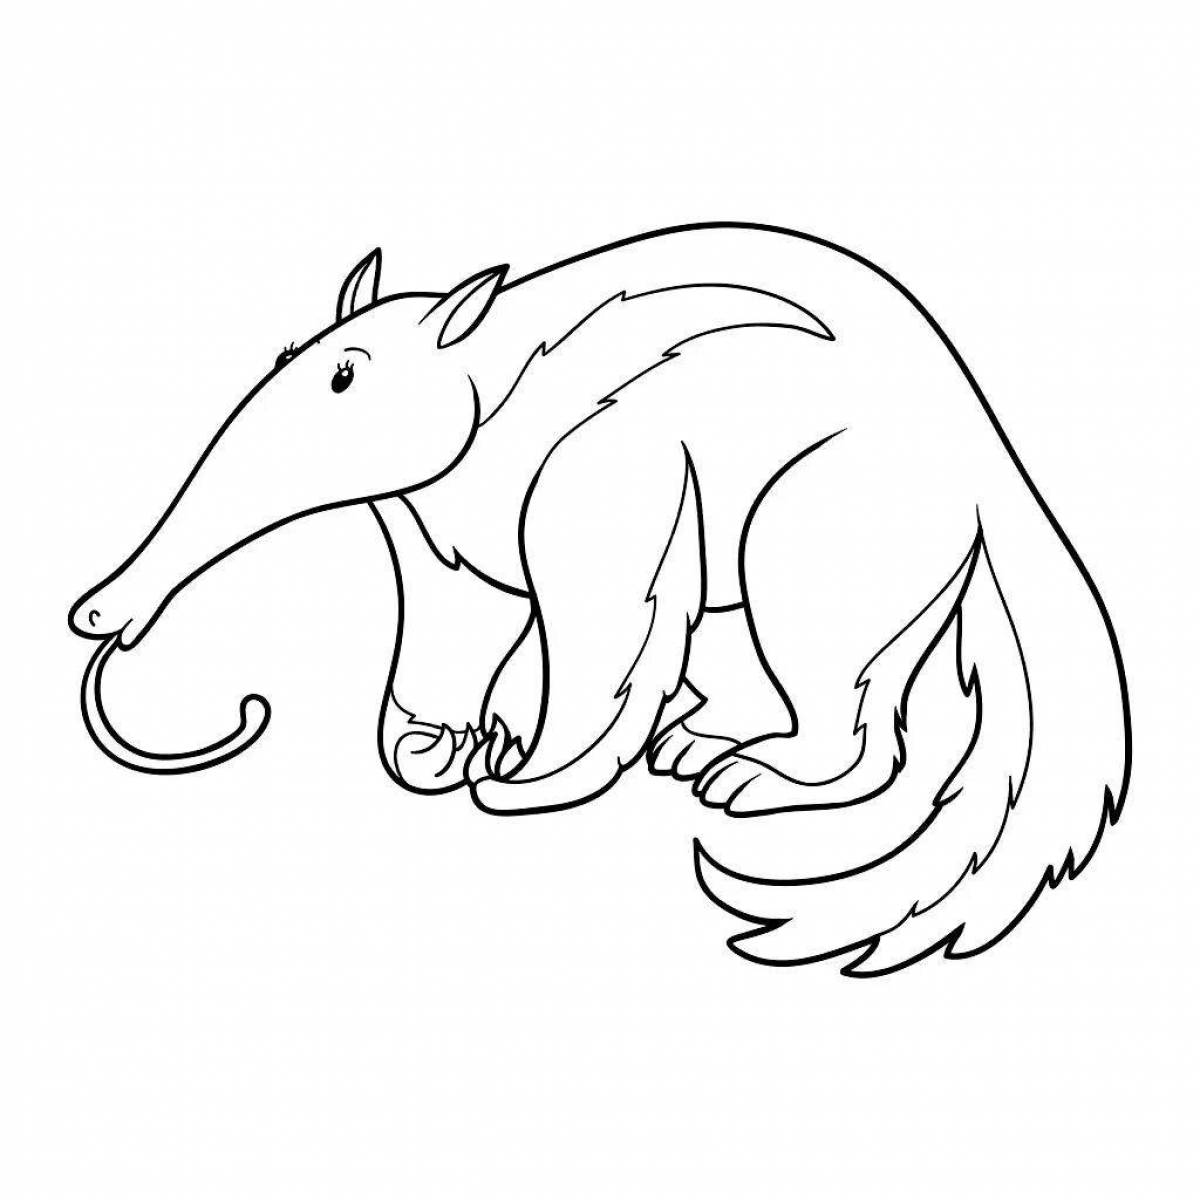 Fancy anteater coloring page